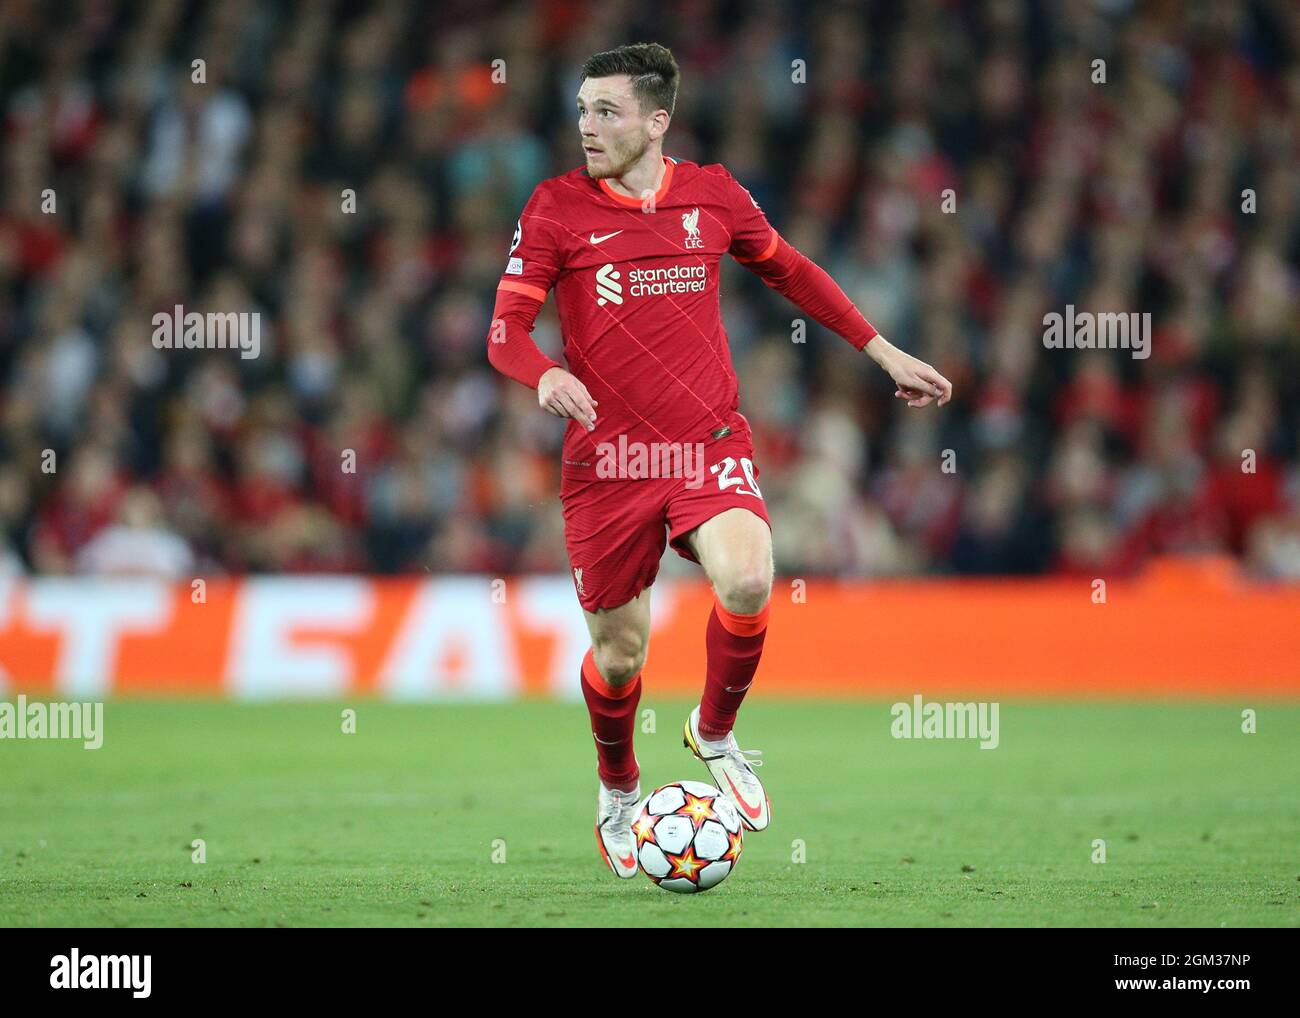 Liverpool, UK. 15th Sep, 2021. Andrew Robertson (Liverpool FC) in action  during Group B - Liverpool FC vs AC Milan, UEFA Champions League football  match in Liverpool, England, September 15 2021 Credit